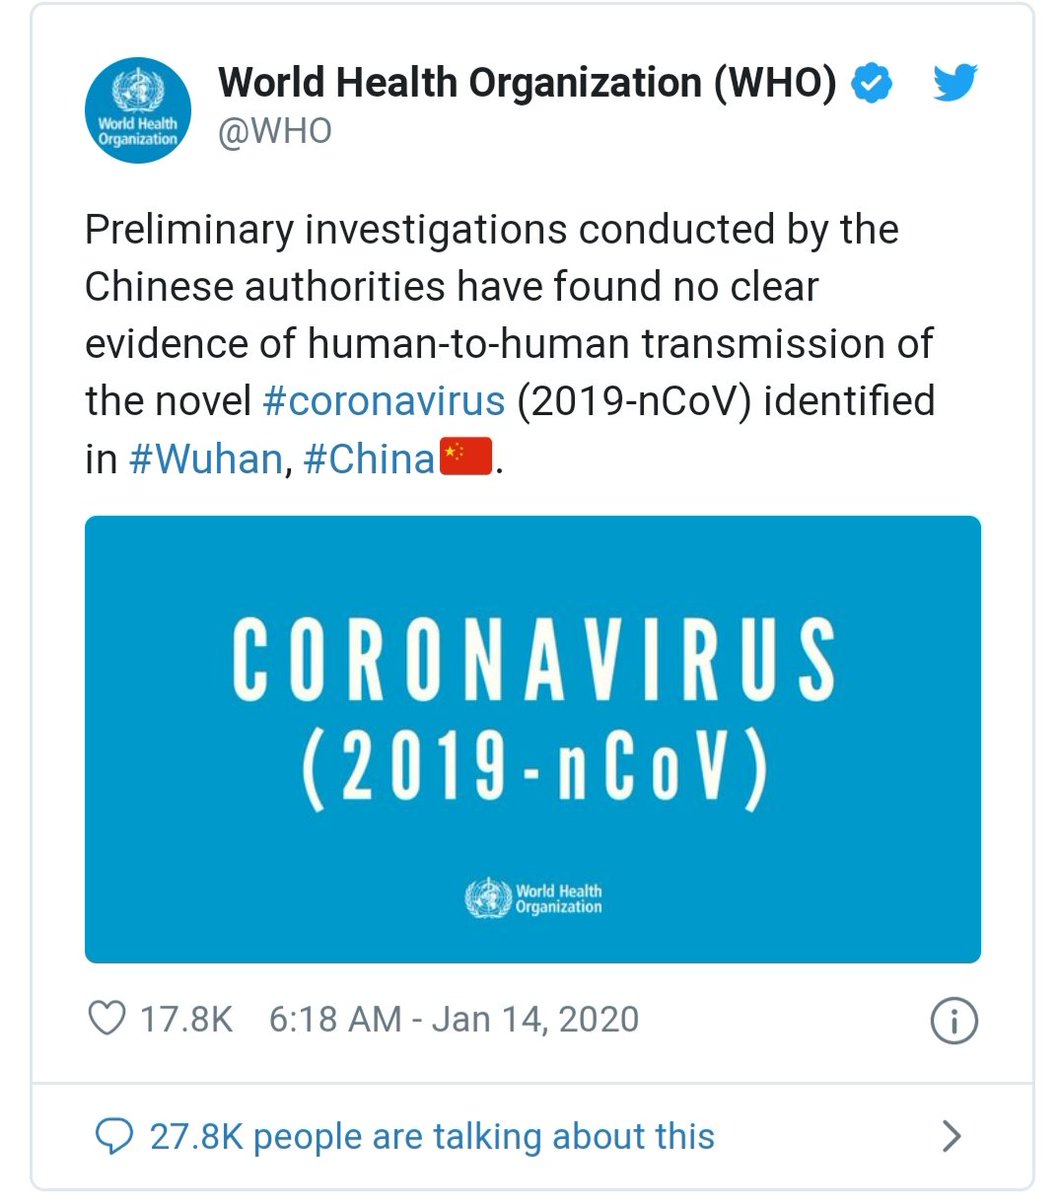 This is what you get for $400M a year from the WHO. Go back, look at how much taxpayer dollars were funneled through our own NIH and CDC. Remember? They all testified before Congress that they were "Well funded"